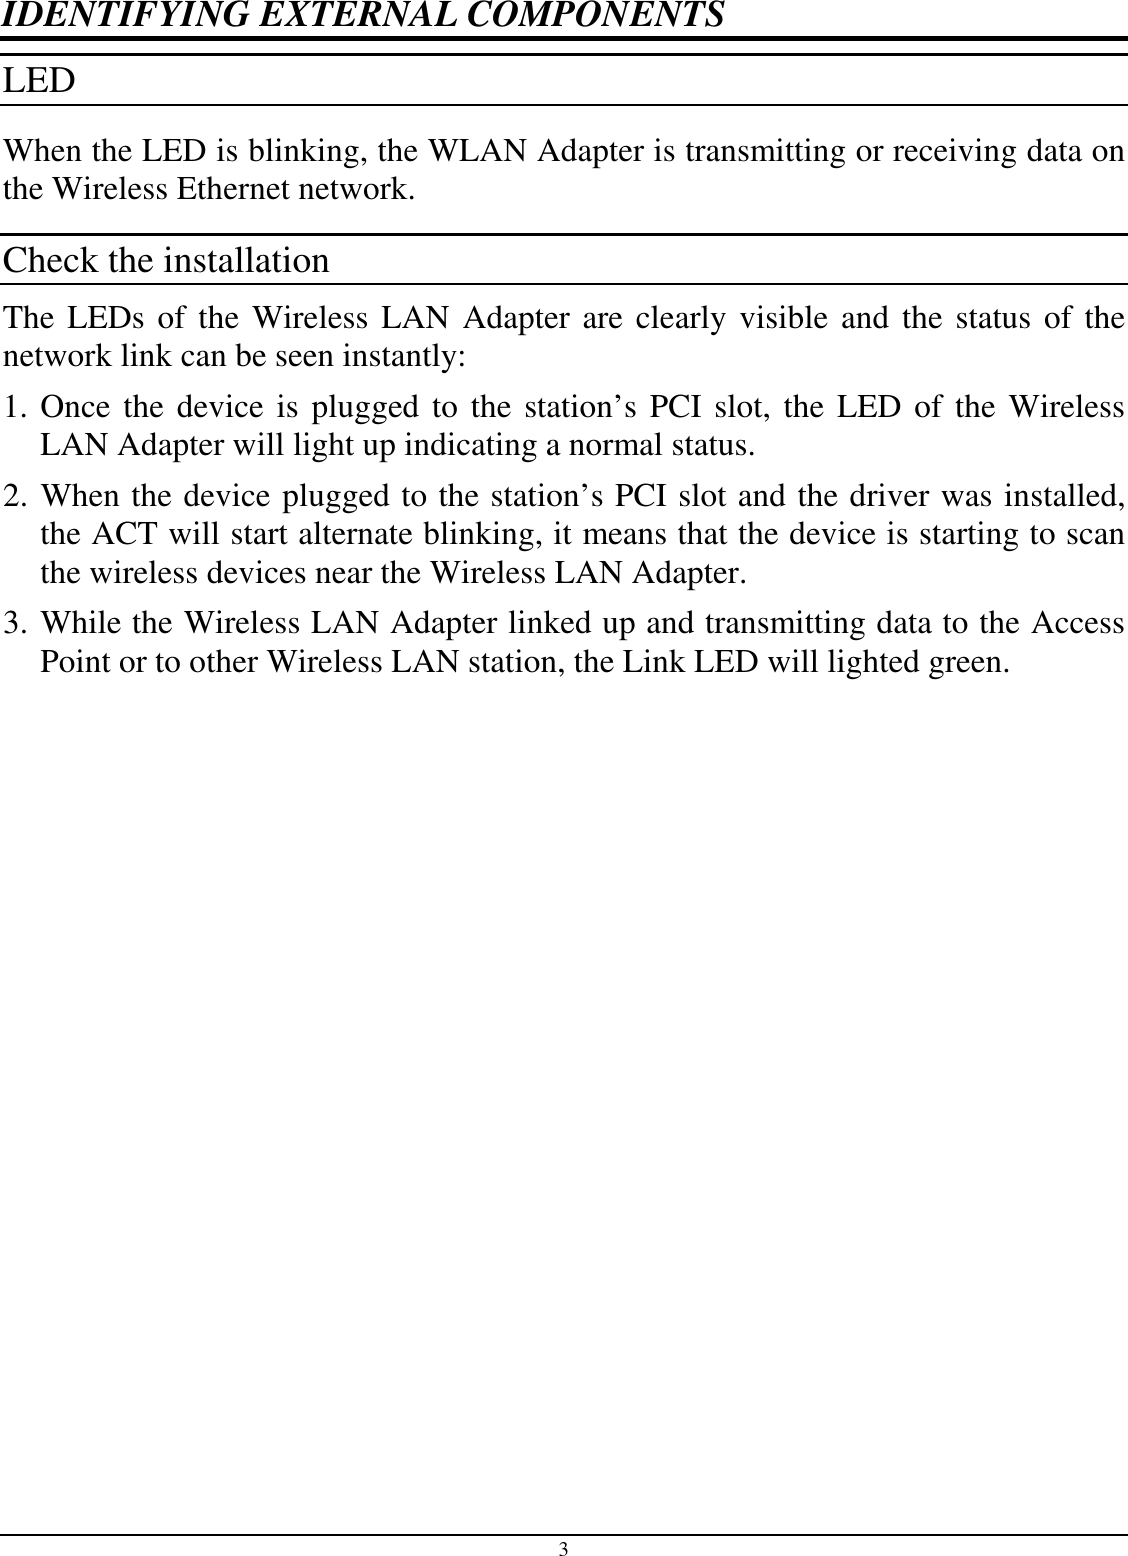 3 IDENTIFYING EXTERNAL COMPONENTS LED  When the LED is blinking, the WLAN Adapter is transmitting or receiving data on the Wireless Ethernet network. Check the installation The LEDs of the Wireless LAN Adapter are clearly visible and the status of the network link can be seen instantly: 1. Once the device is plugged to the station’s PCI slot, the LED of the Wireless LAN Adapter will light up indicating a normal status. 2. When the device plugged to the station’s PCI slot and the driver was installed, the ACT will start alternate blinking, it means that the device is starting to scan the wireless devices near the Wireless LAN Adapter. 3. While the Wireless LAN Adapter linked up and transmitting data to the Access Point or to other Wireless LAN station, the Link LED will lighted green. 